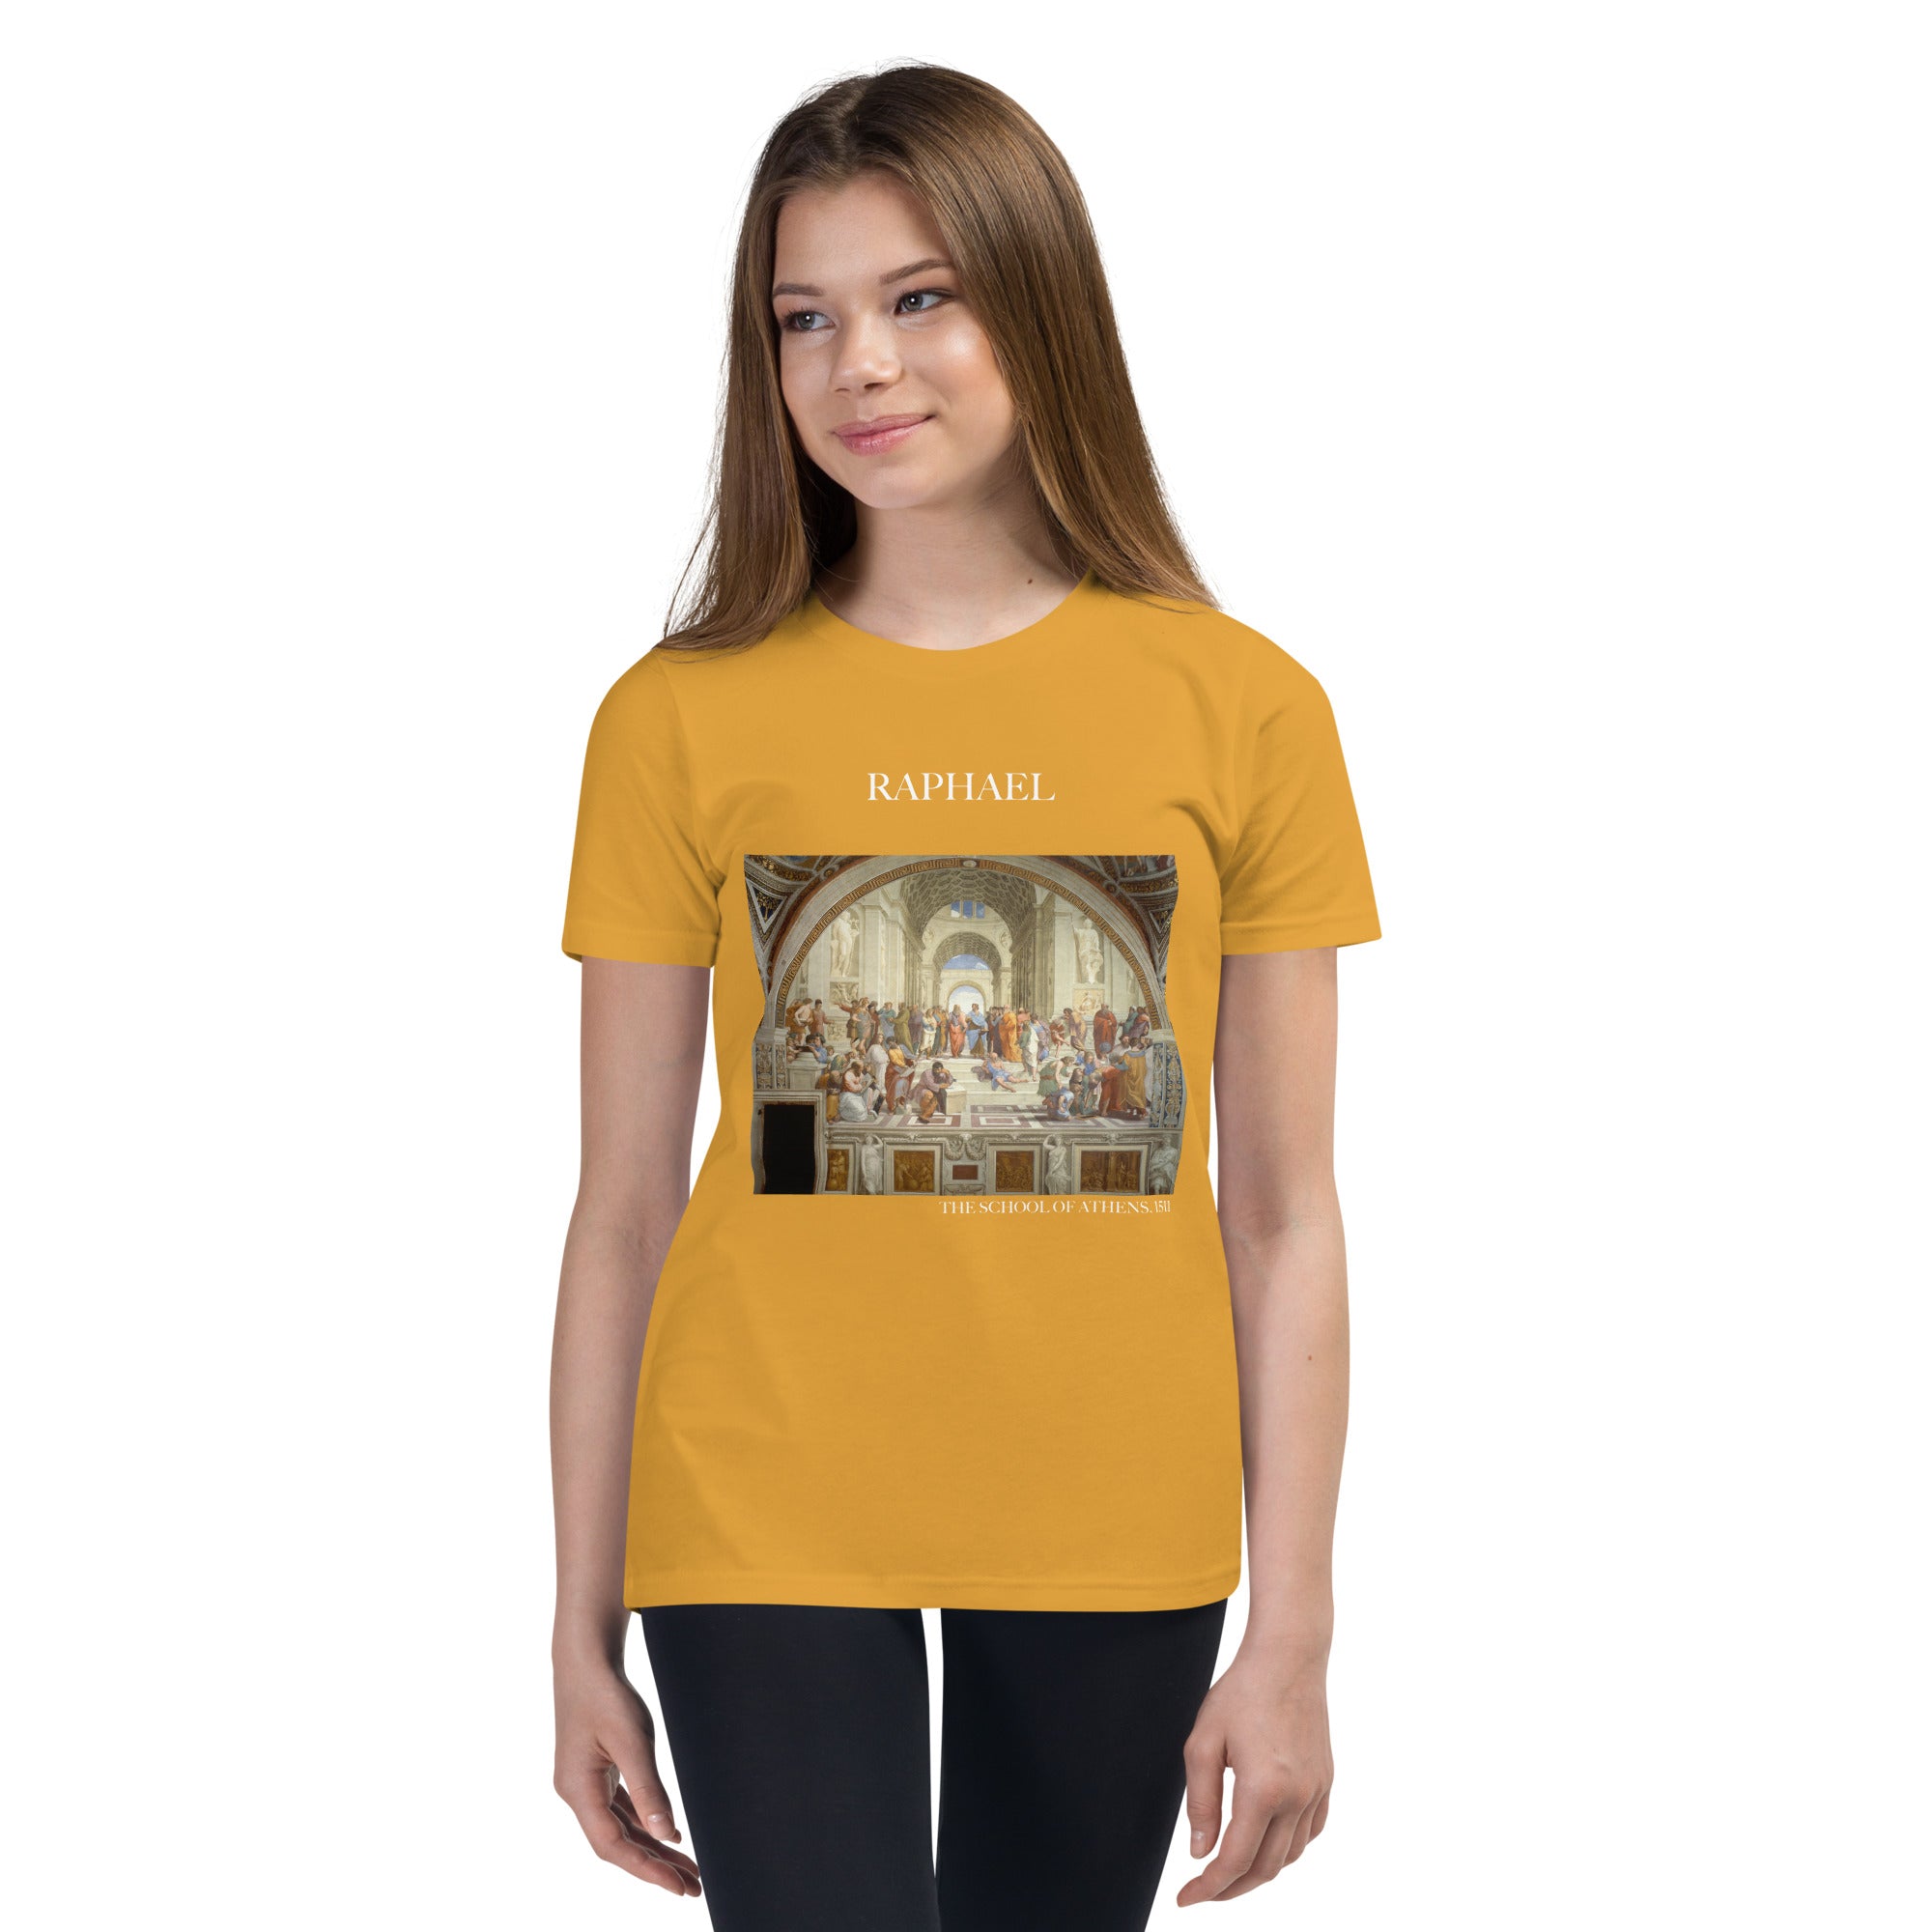 Raphael 'The School of Athens' Famous Painting Short Sleeve T-Shirt | Premium Youth Art Tee